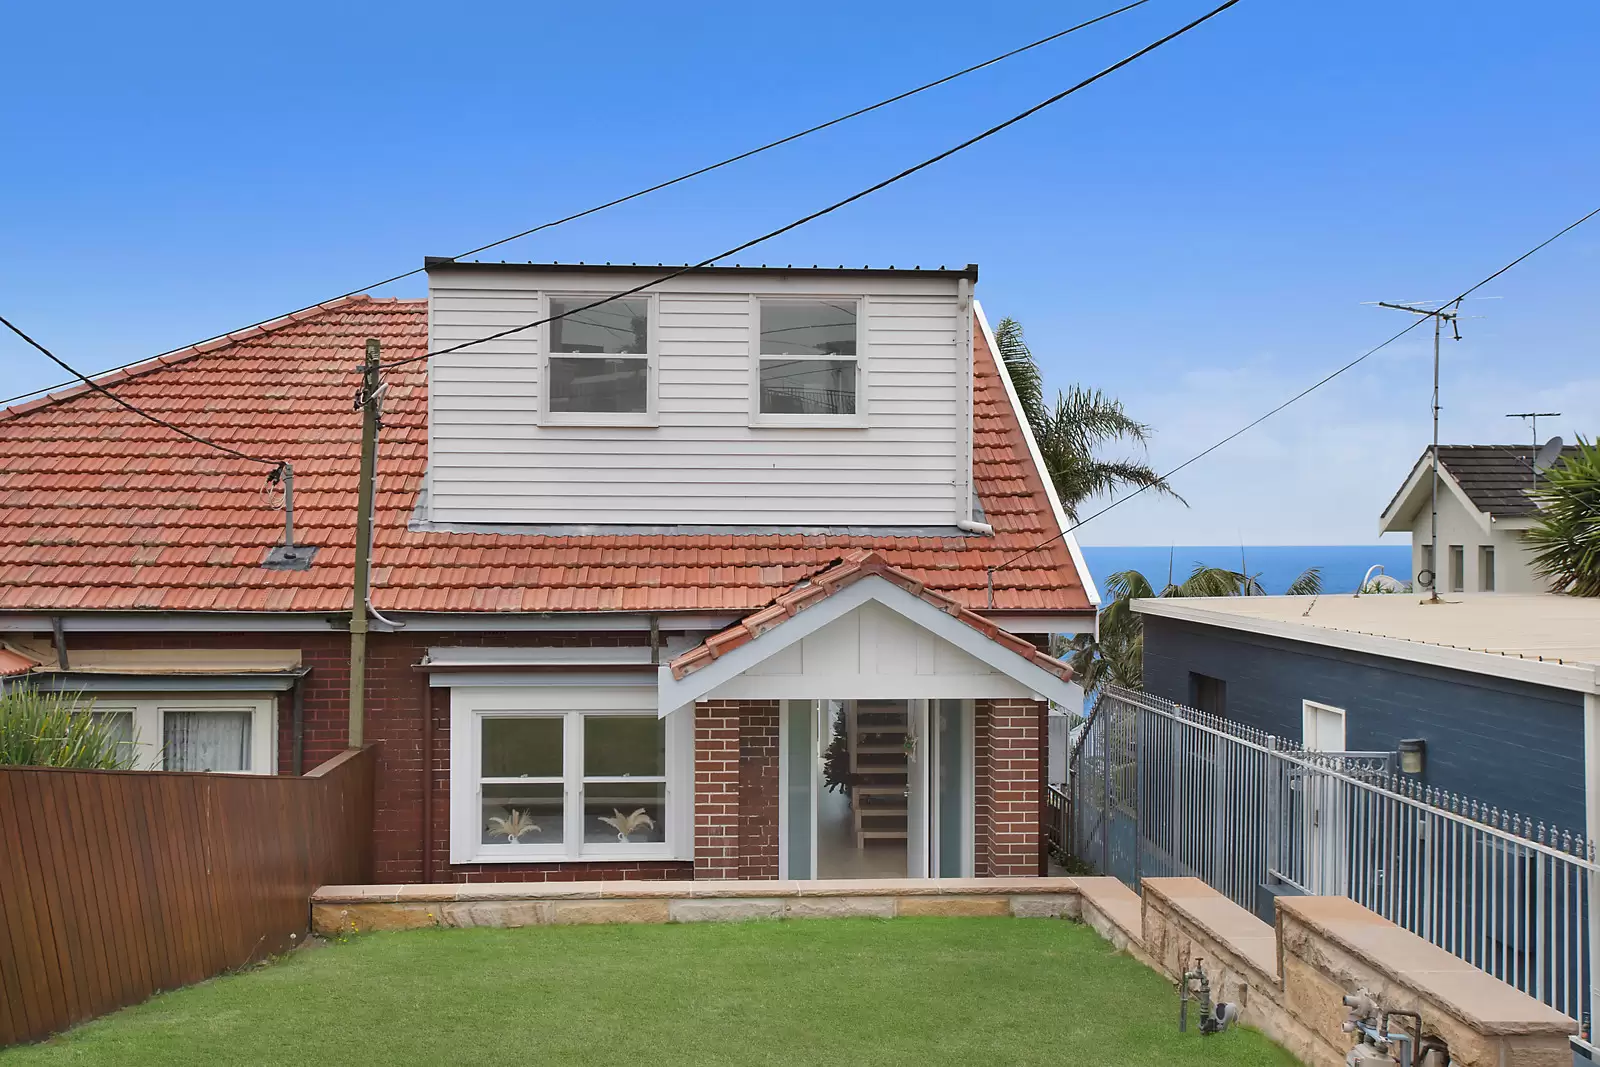 Photo #13: 39 Denning Street, South Coogee - Auction by Sydney Sotheby's International Realty